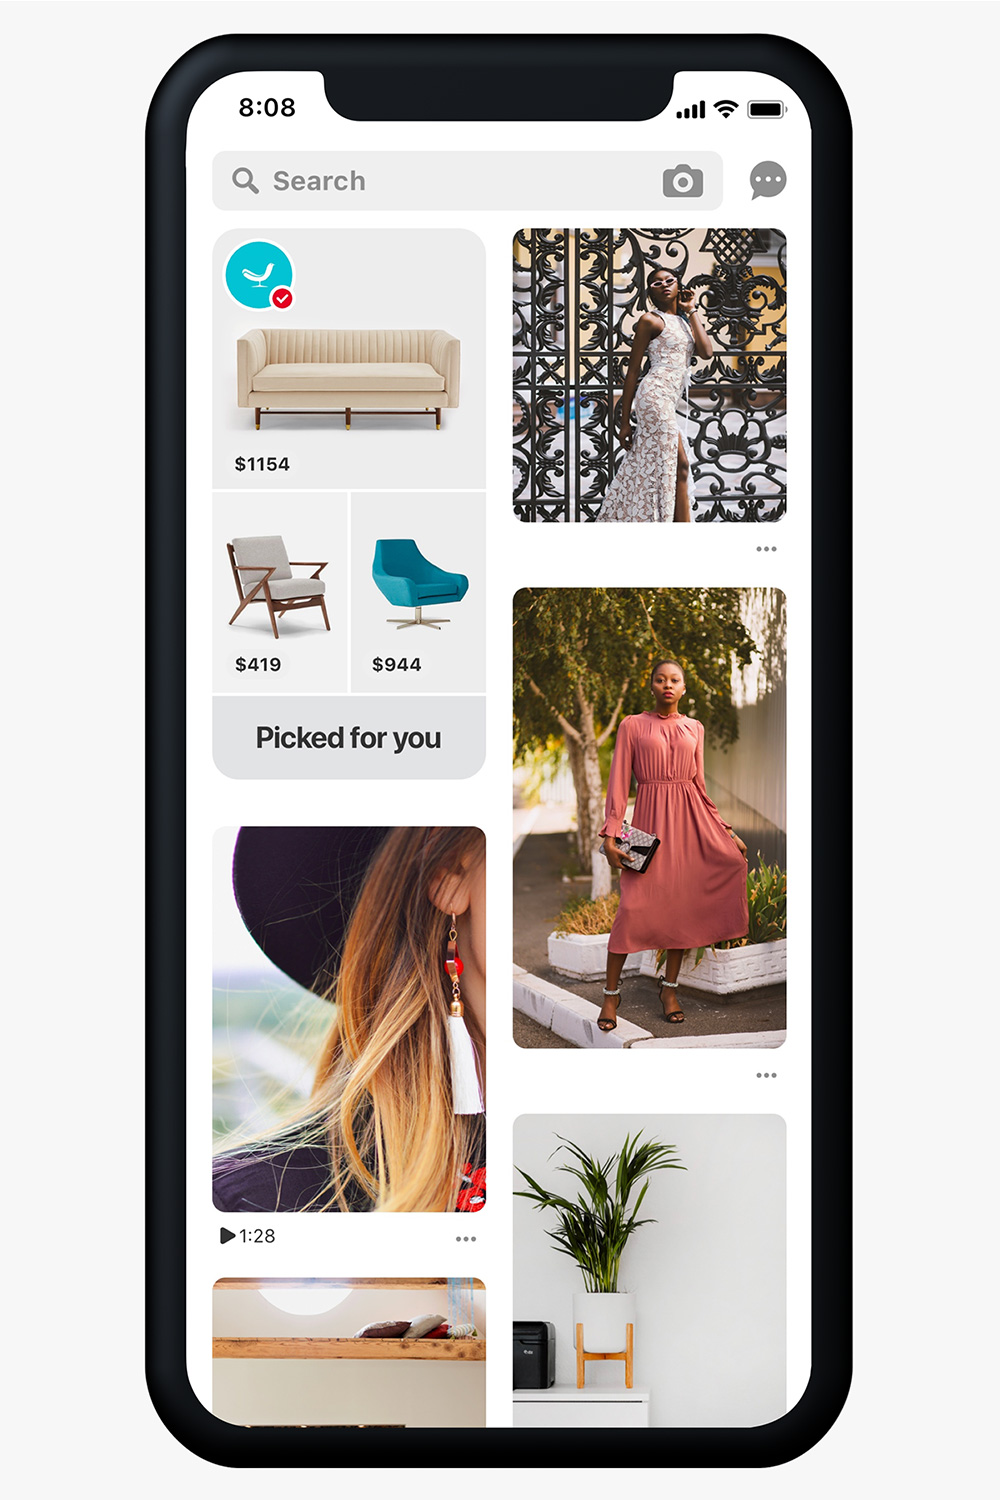 New shopping recommendations will appear at the top of home feed